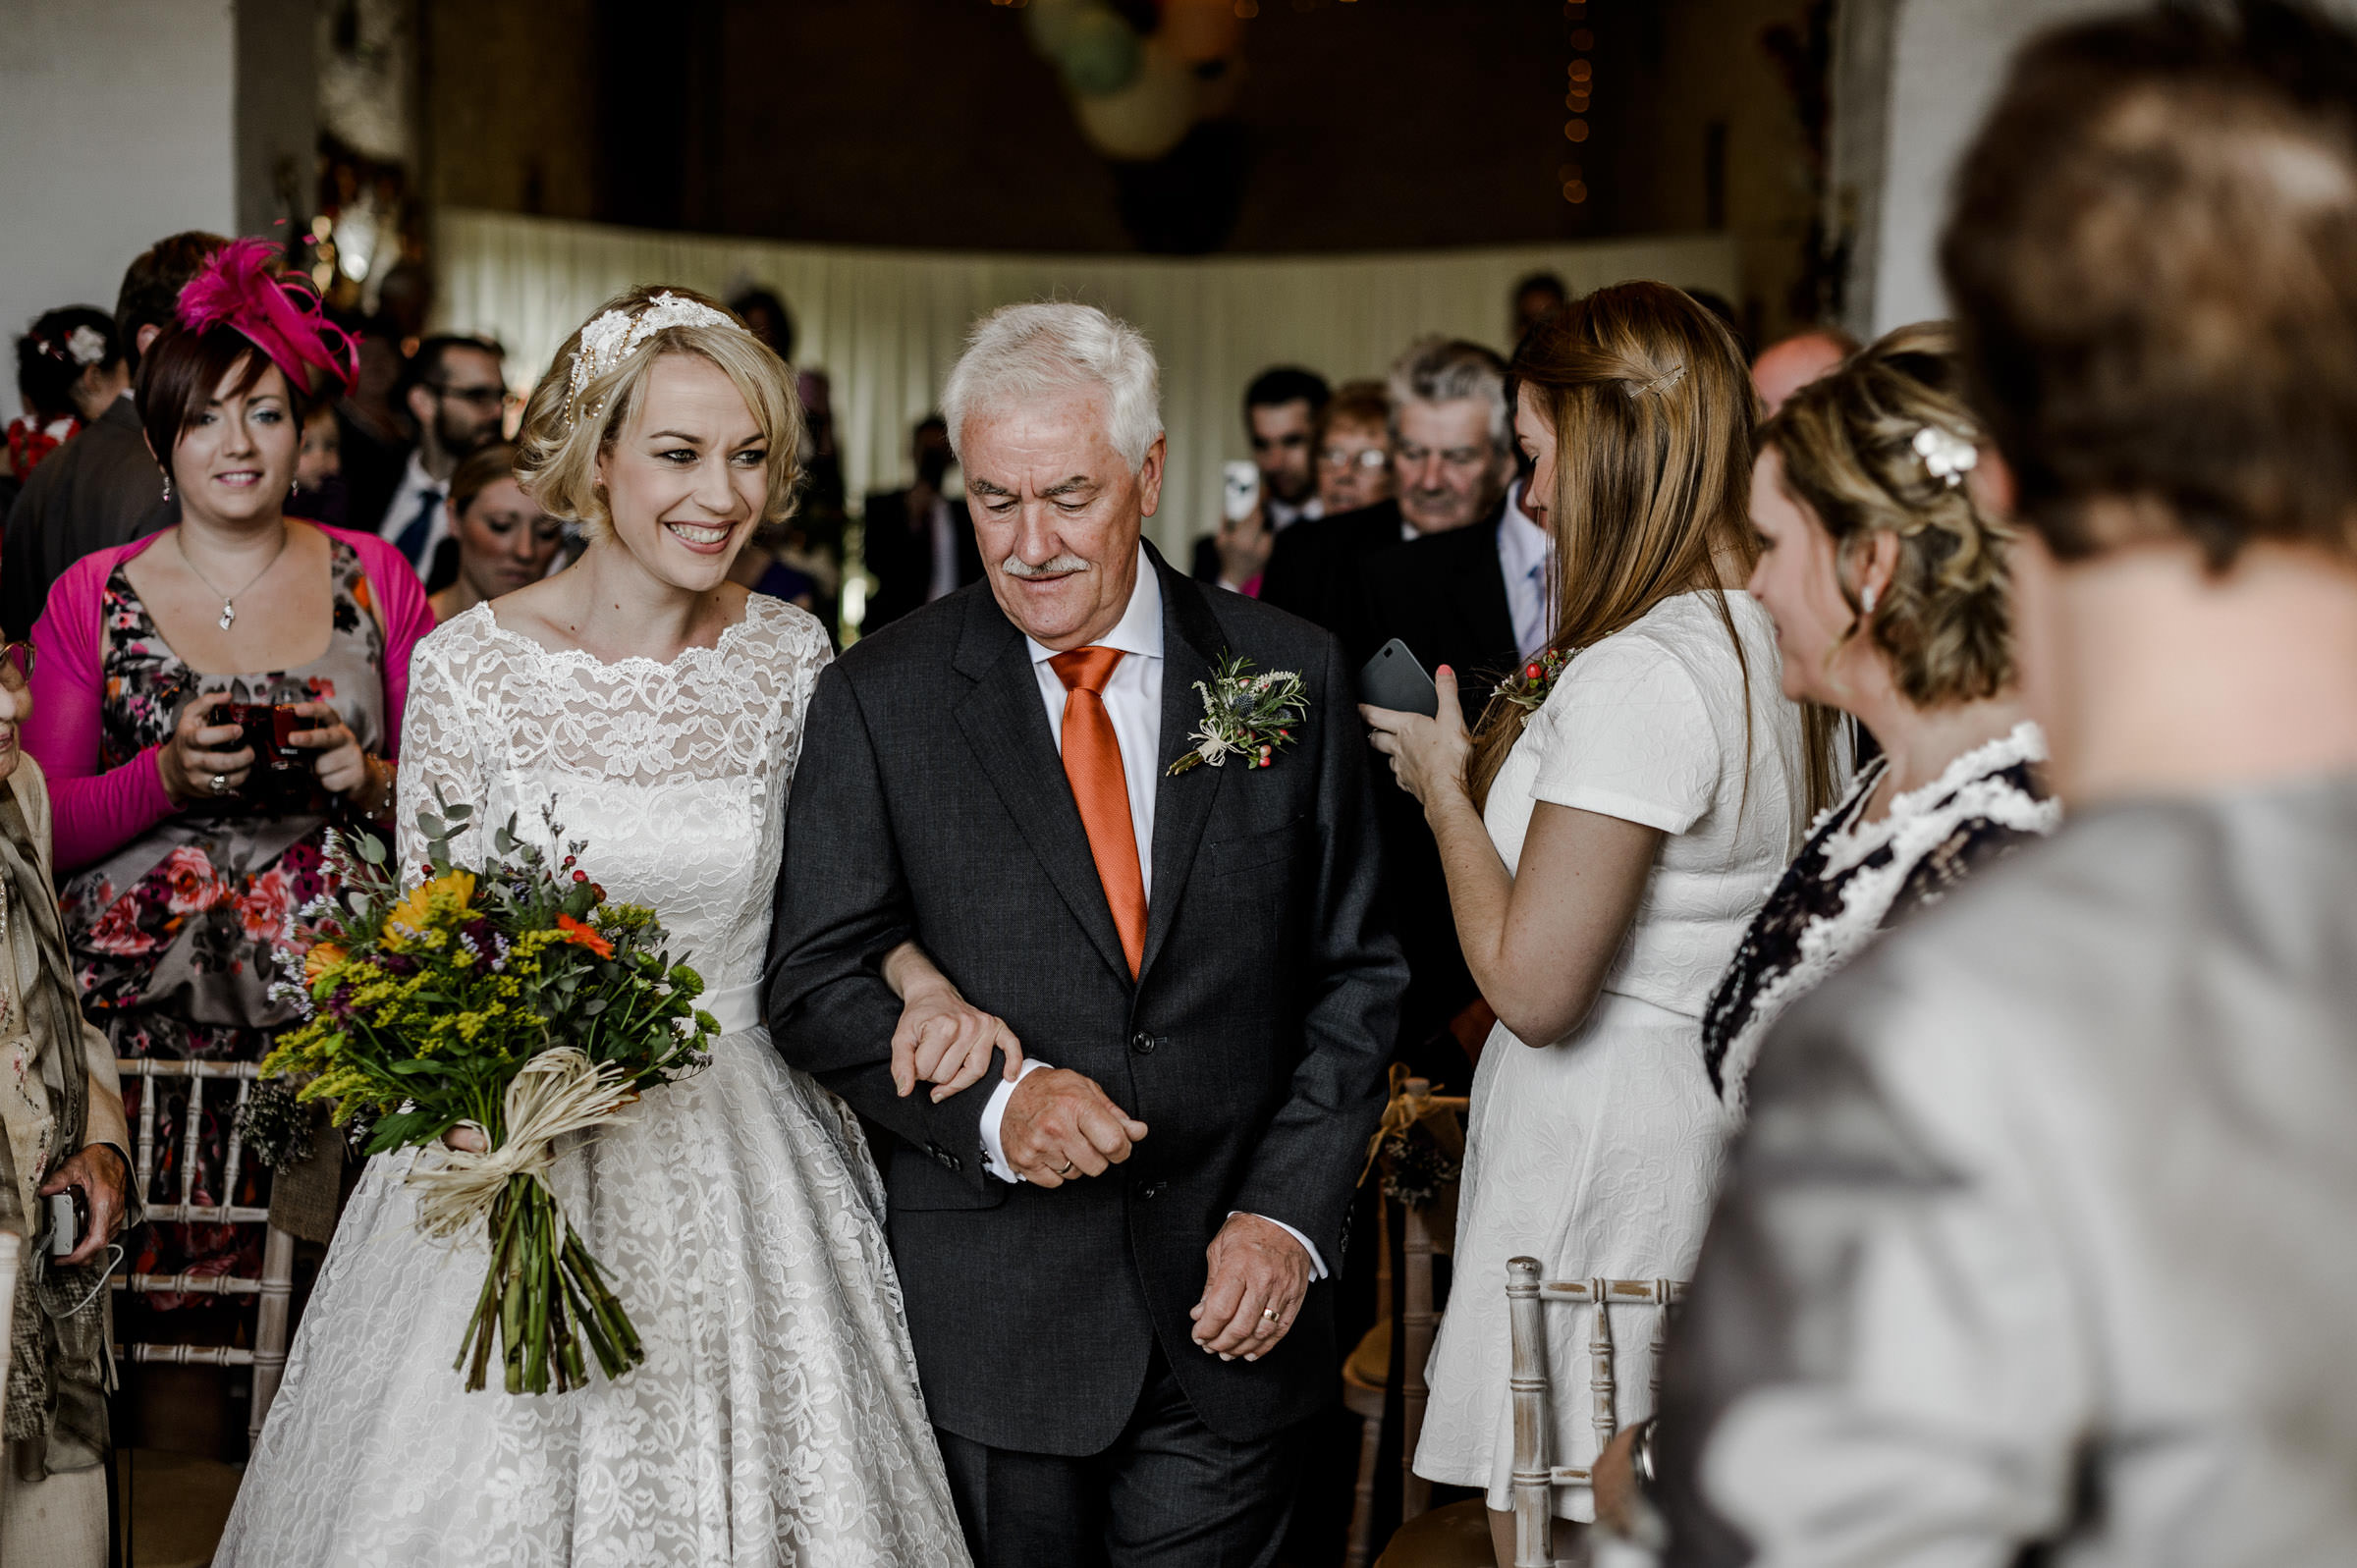 Reportage Wedding Photography South Wales 027.jpg